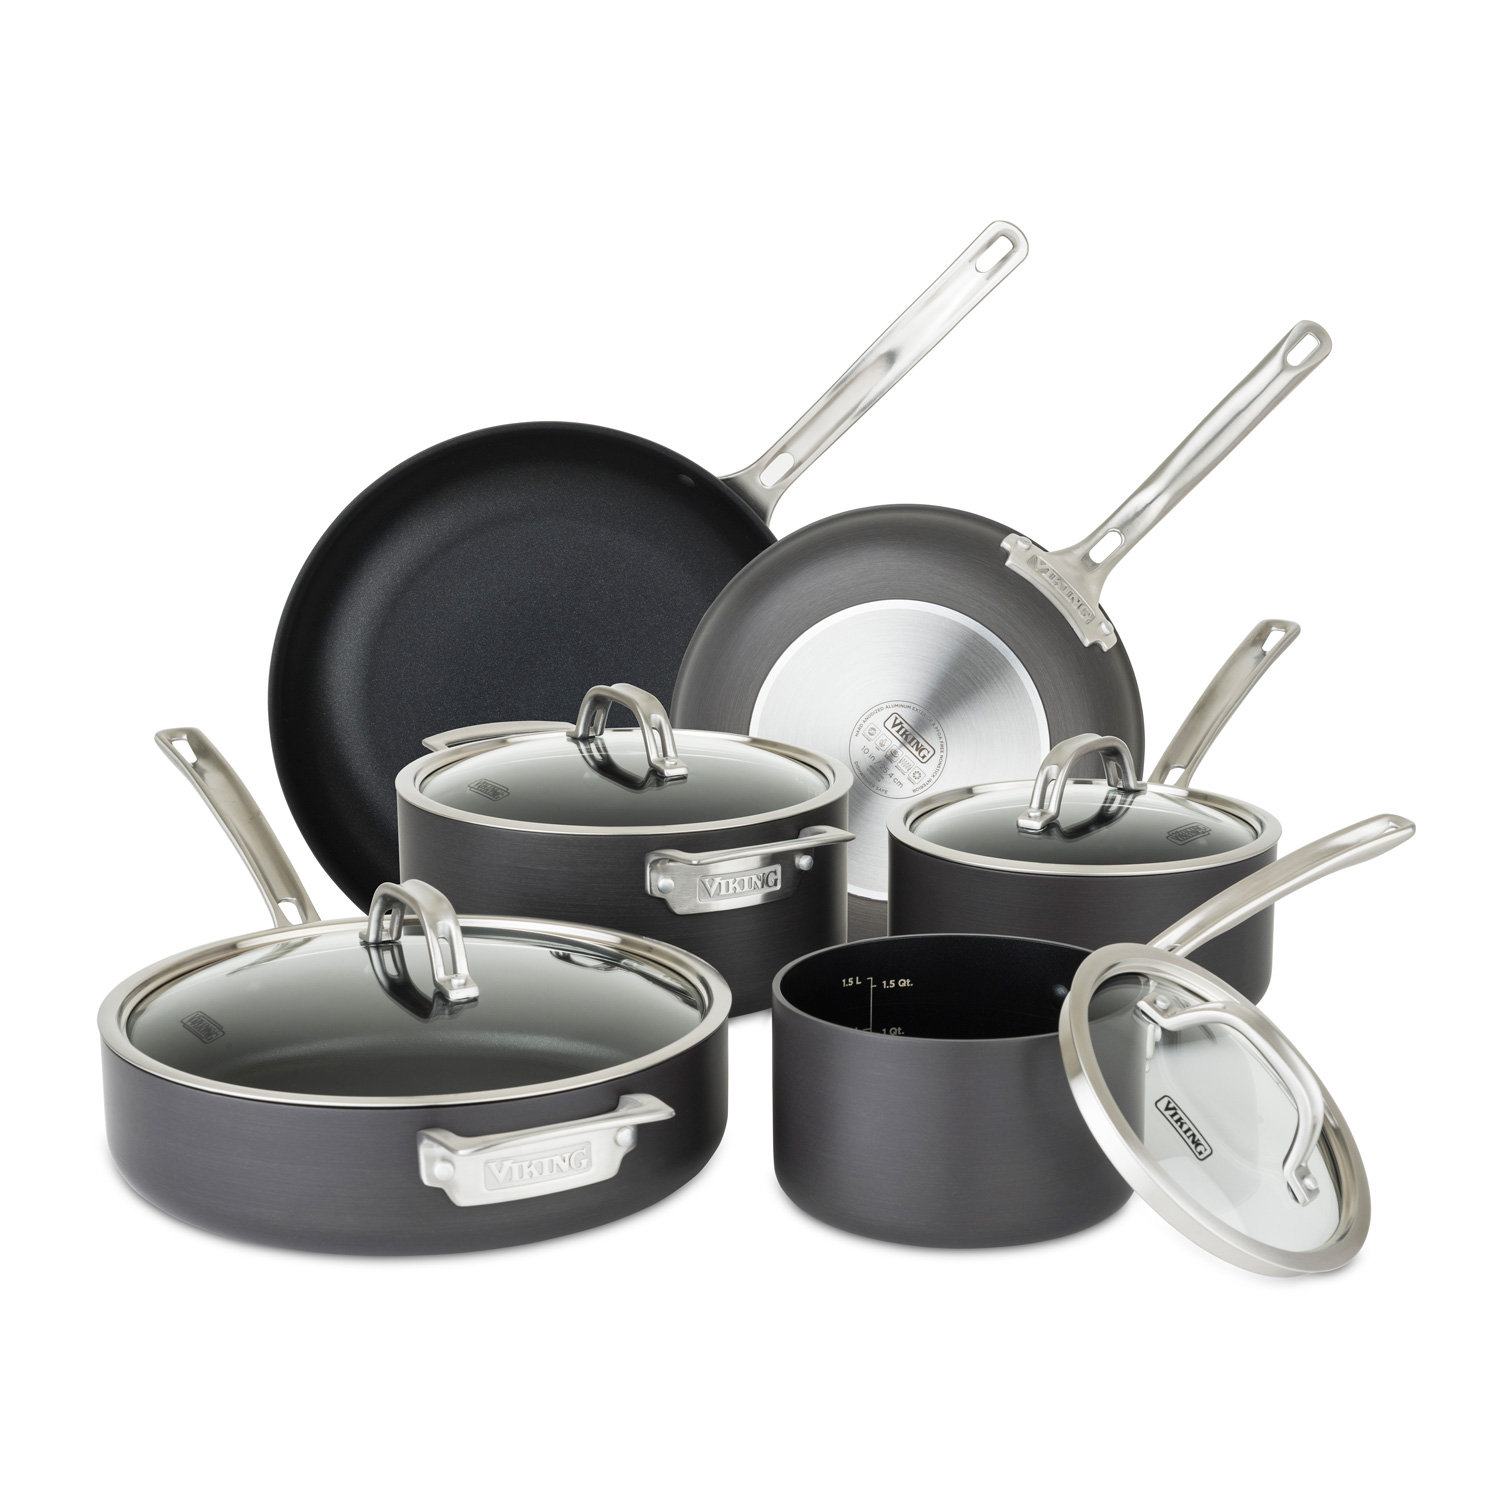  Viking Culinary 3-Ply Stainless Steel Cookware Set, 17 piece,  Includes Pots & Pans, Steamer Insert & Glass Lids, Dishwasher, Oven Safe,  Works on All Cooktops including Induction,Silver: Home & Kitchen